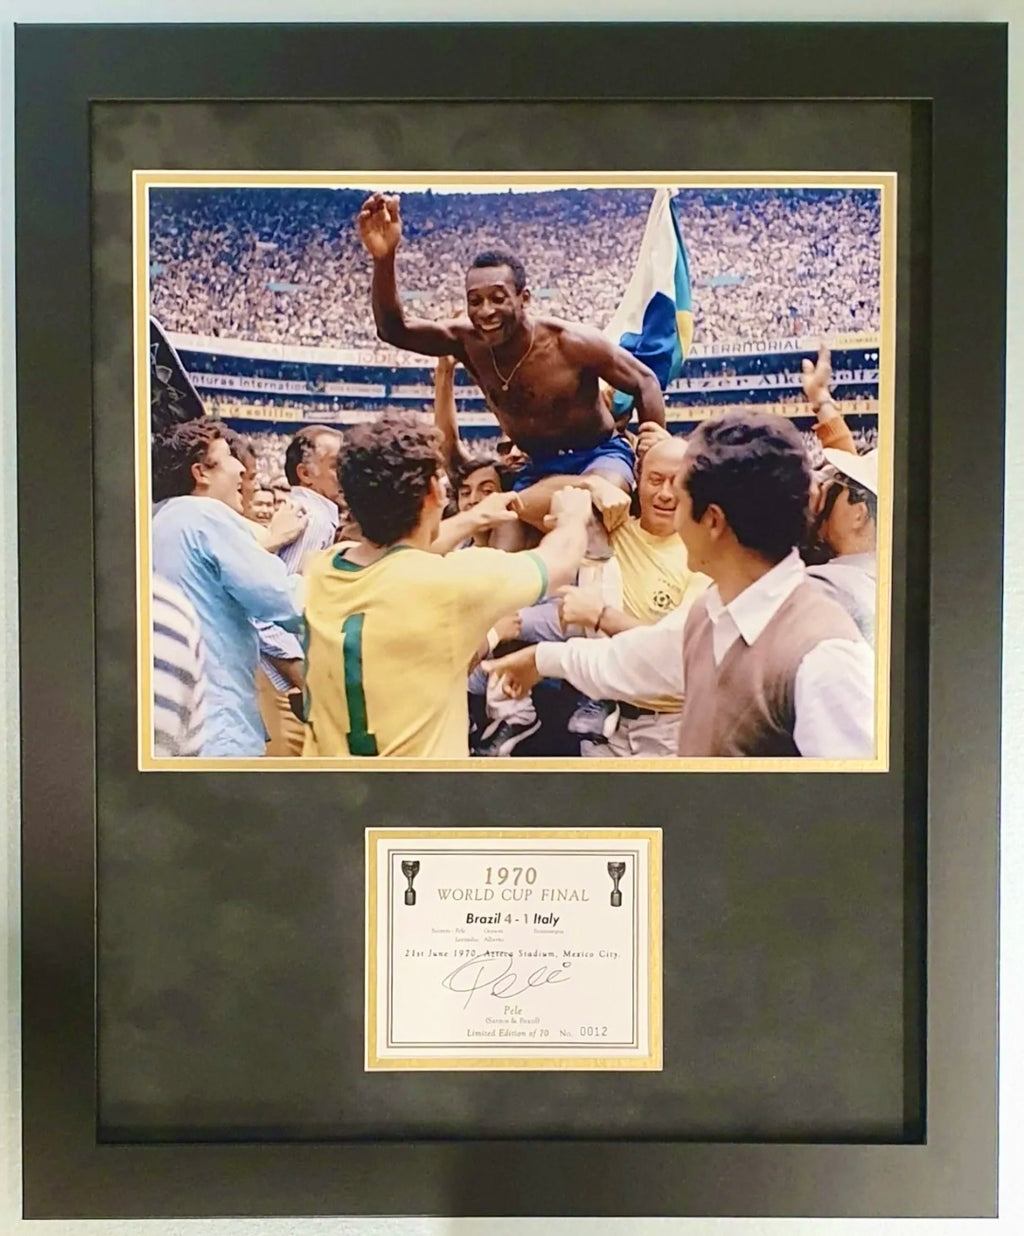 World Cup Final Brazil vs Italy 1970 Pele Autographed Champagne Label with Certificate of Authenticity